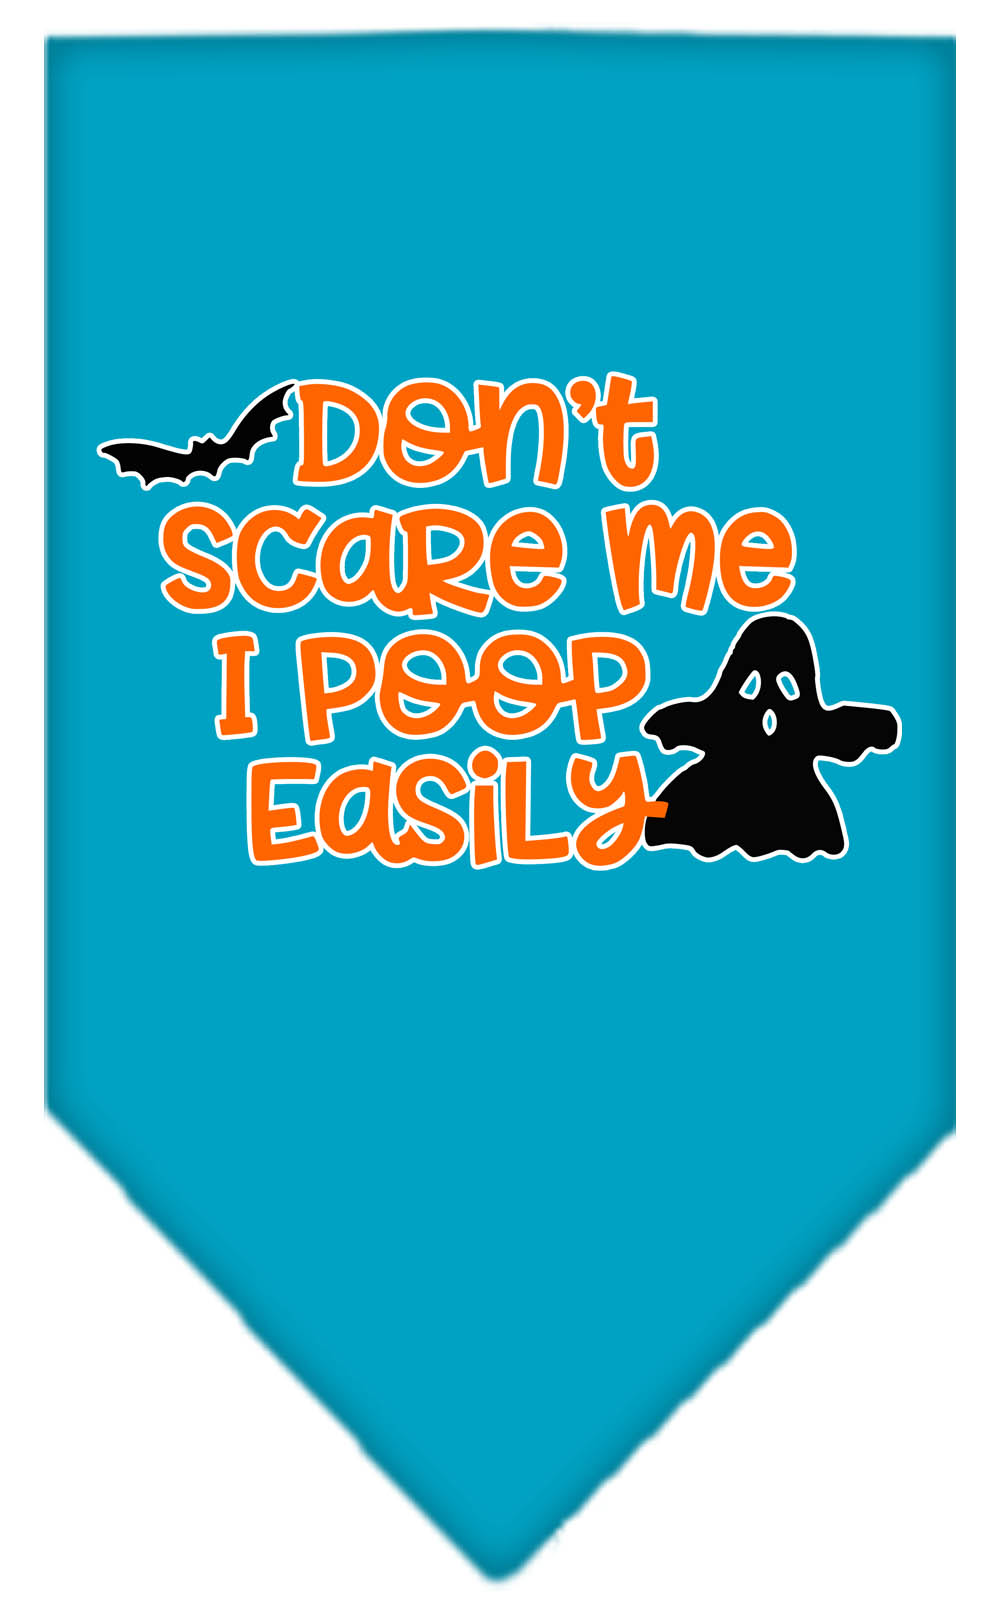 Don't Scare Me, Poops Easily Screen Print Bandana Turquoise Large